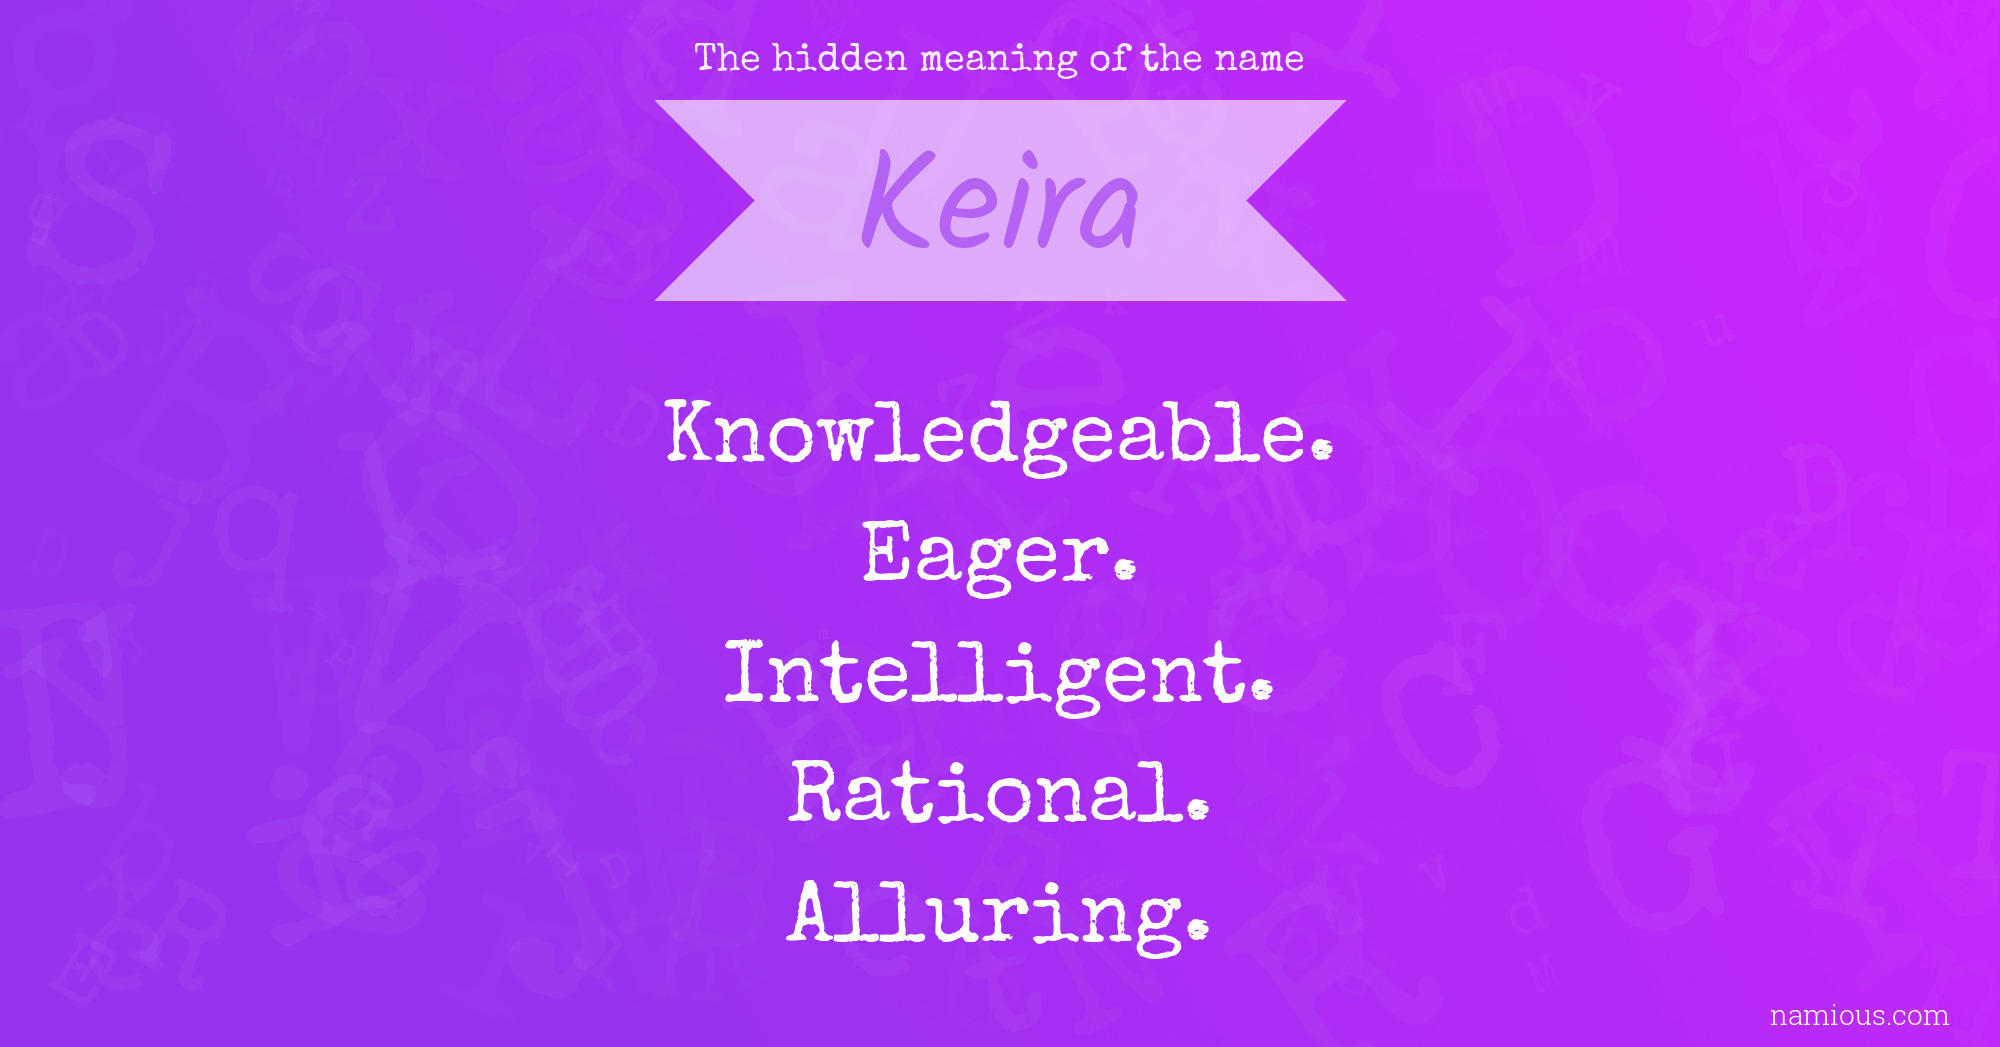 The hidden meaning of the name Keira